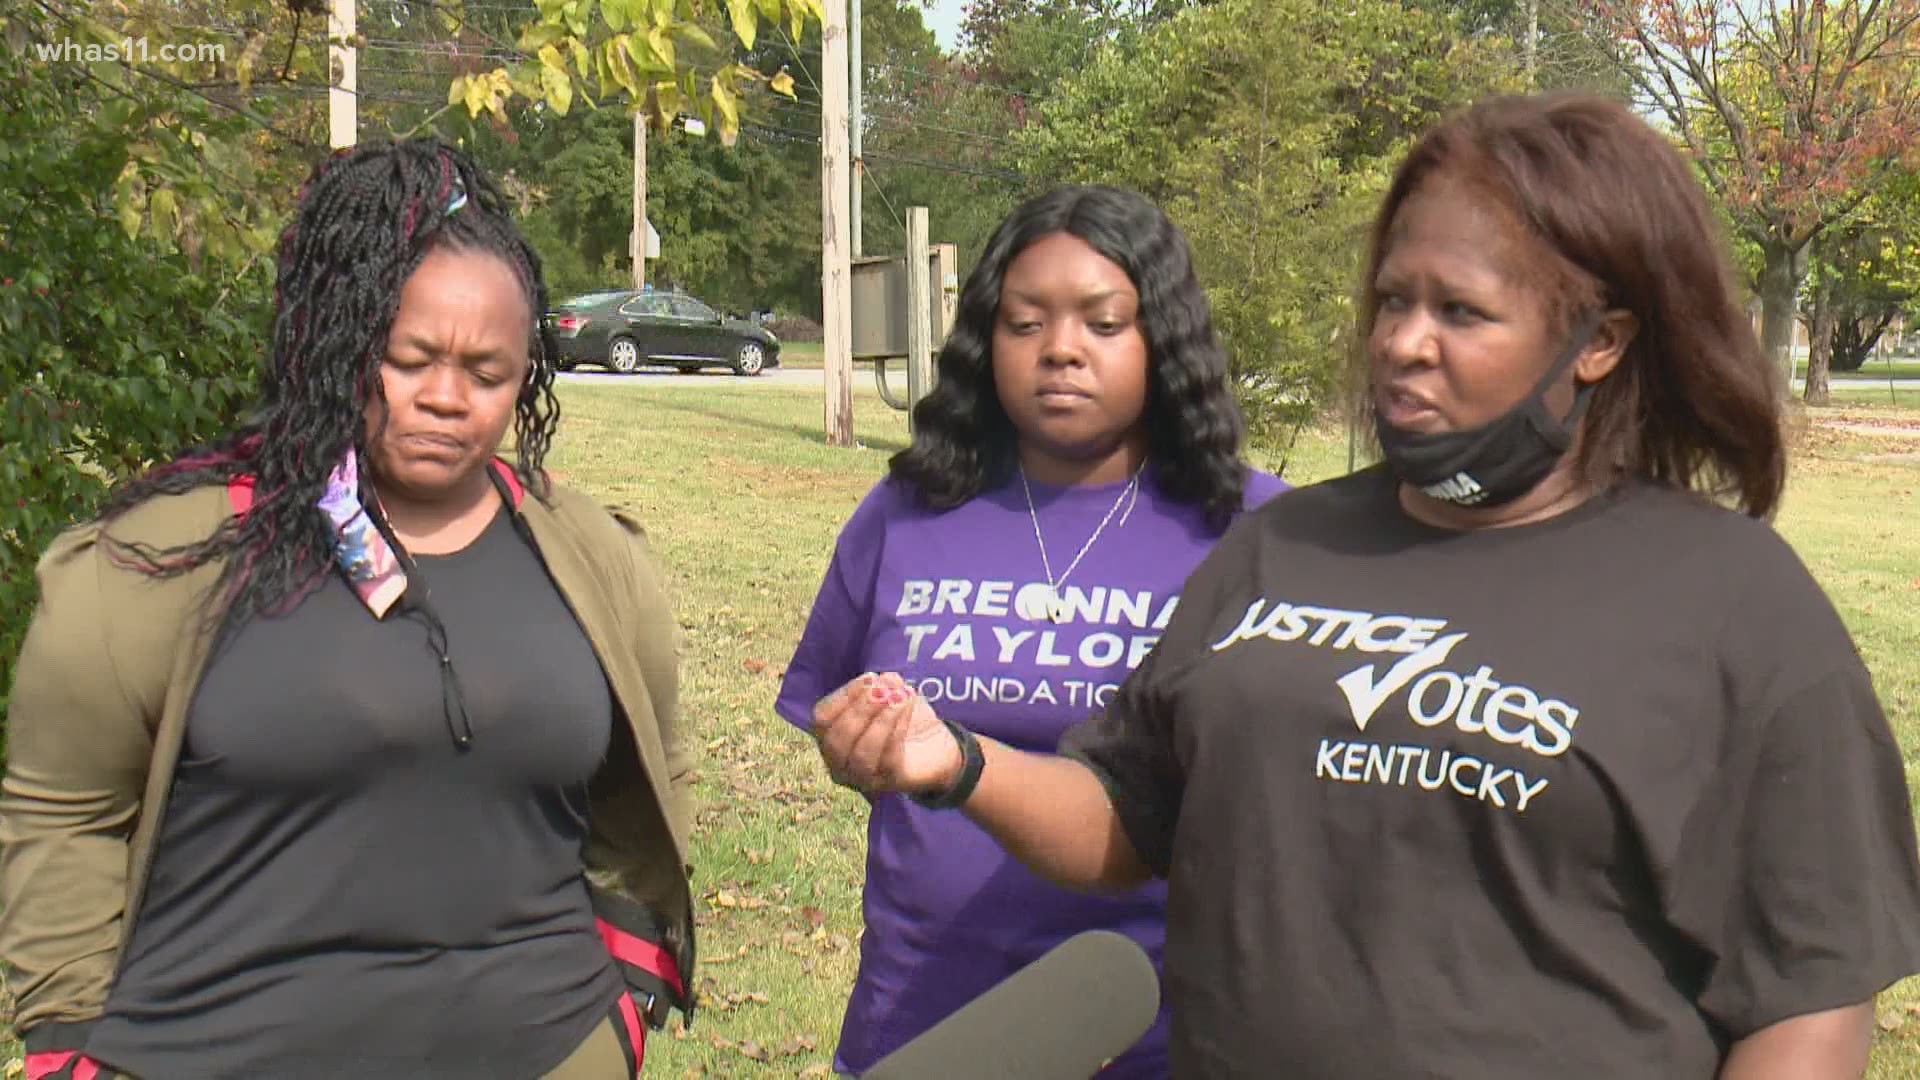 An LMPD sergeant who helped serve a warrant at Breonna Taylor's home spoke about his experience in an interview with ABC News and the Courier-Journal.